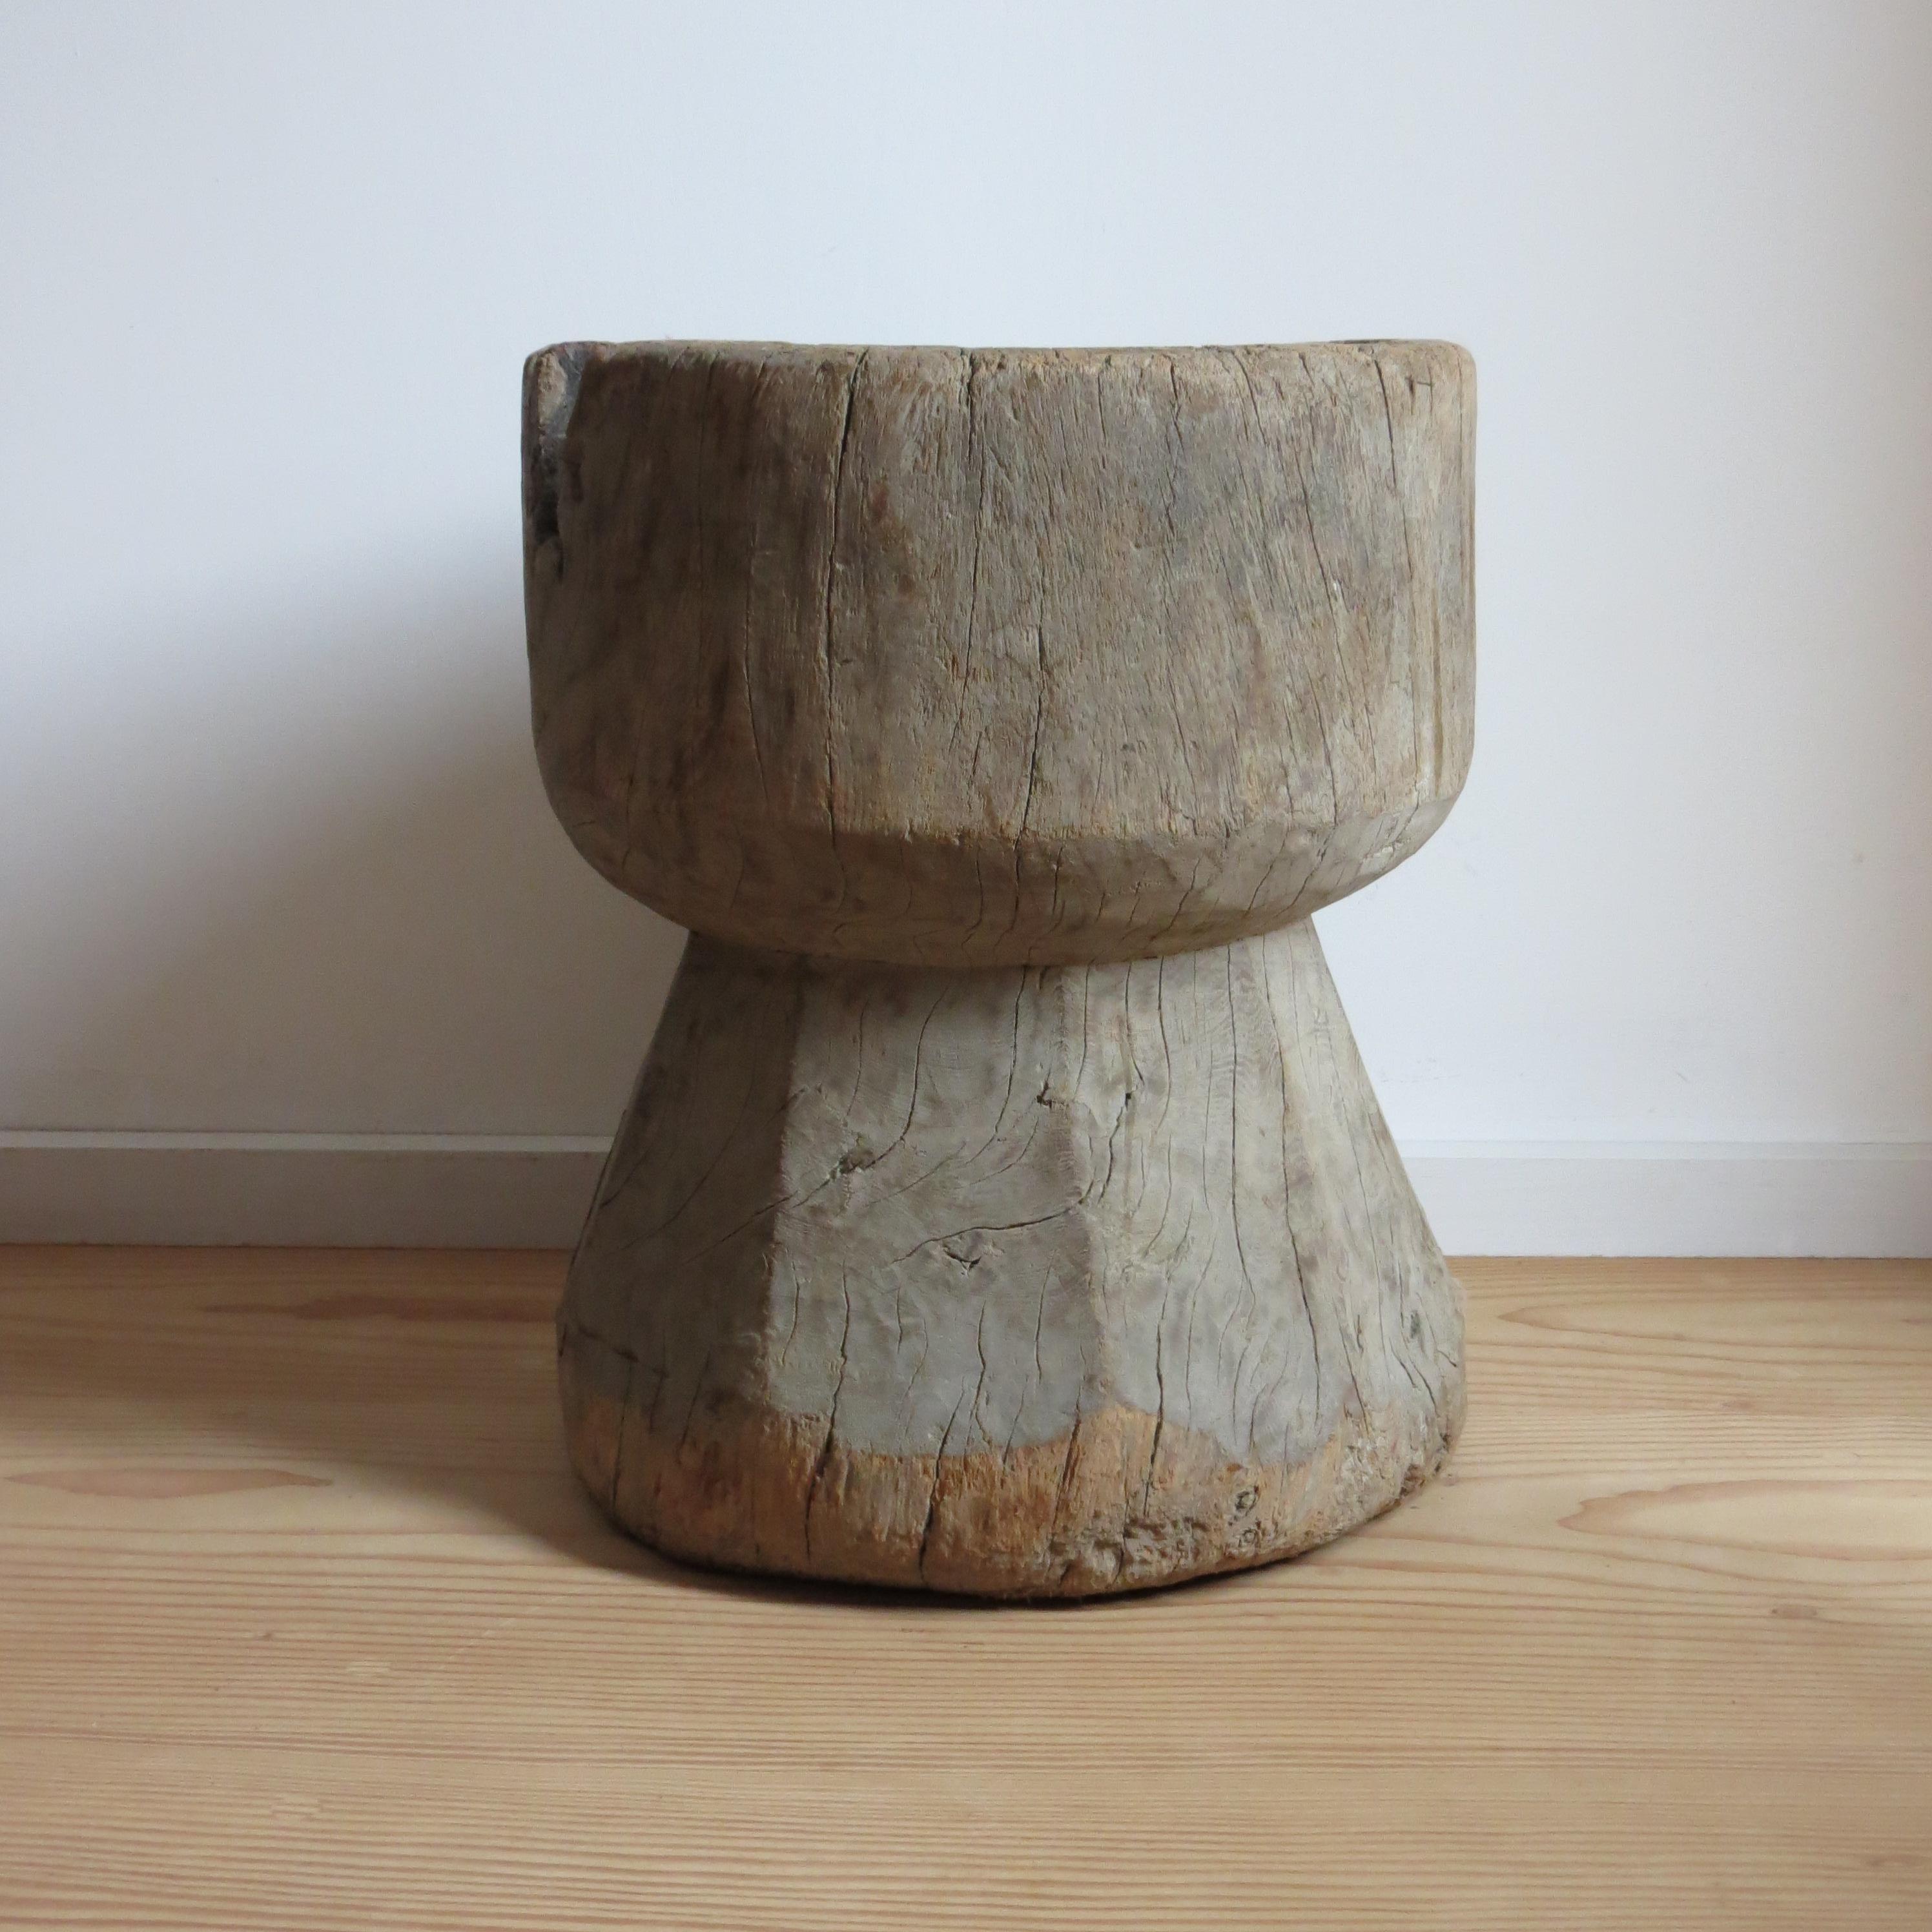 A wonderful primitive rustic wooden mortar stool or table. 
Made from hardwood, this piece has been hand crafted.
The piece is very versatile and can be used as a small table or stool or turned up the other way and used as a plant holder or as a